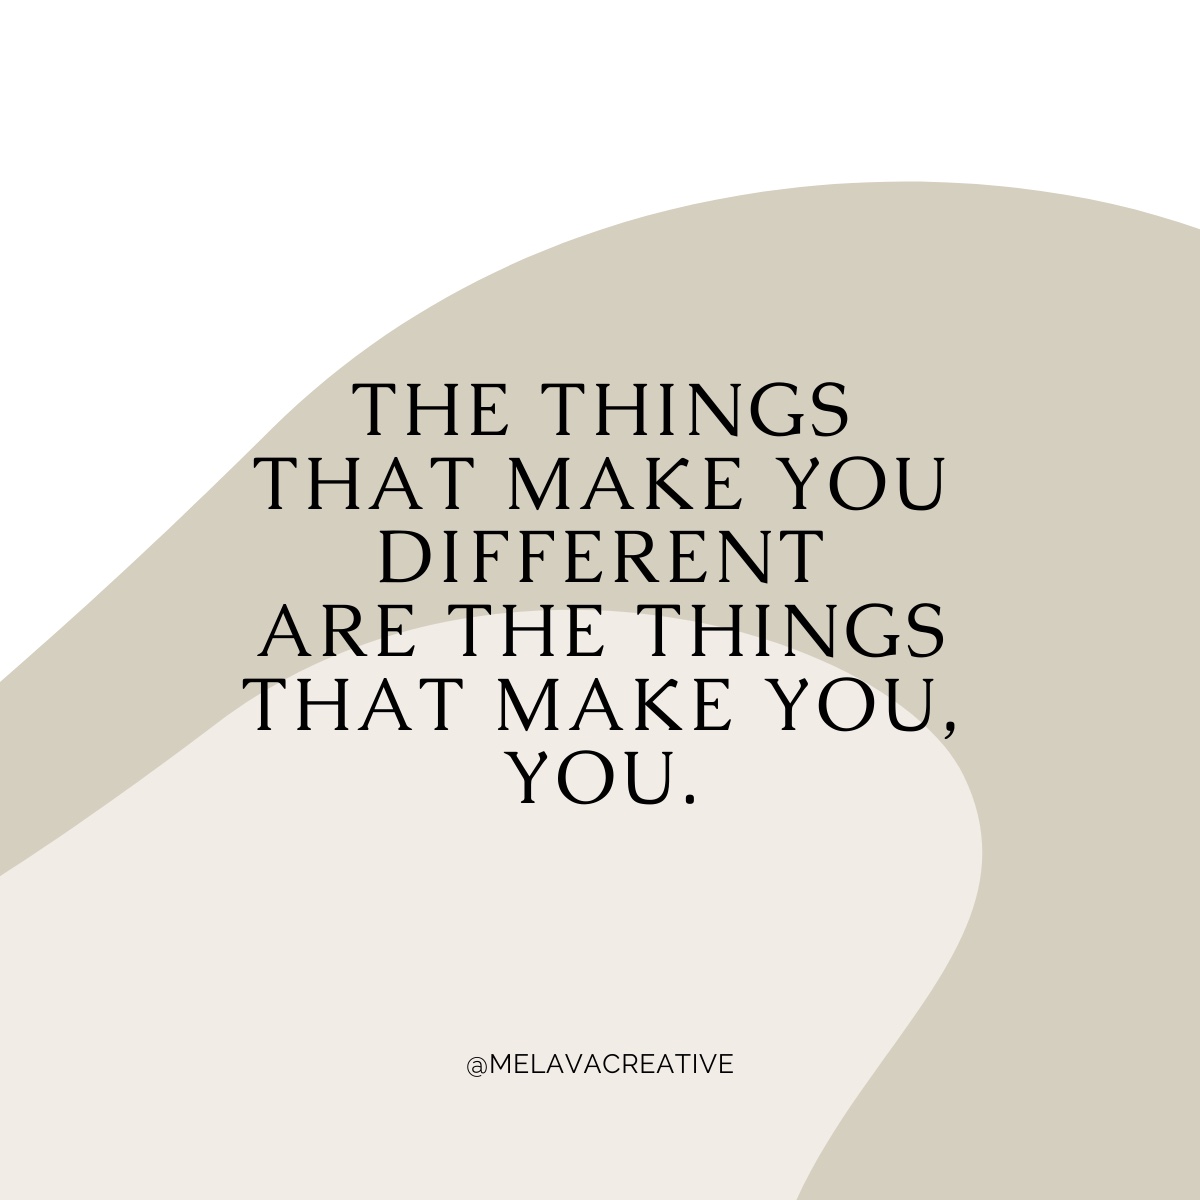 The things that make you different are the things that make you, you.